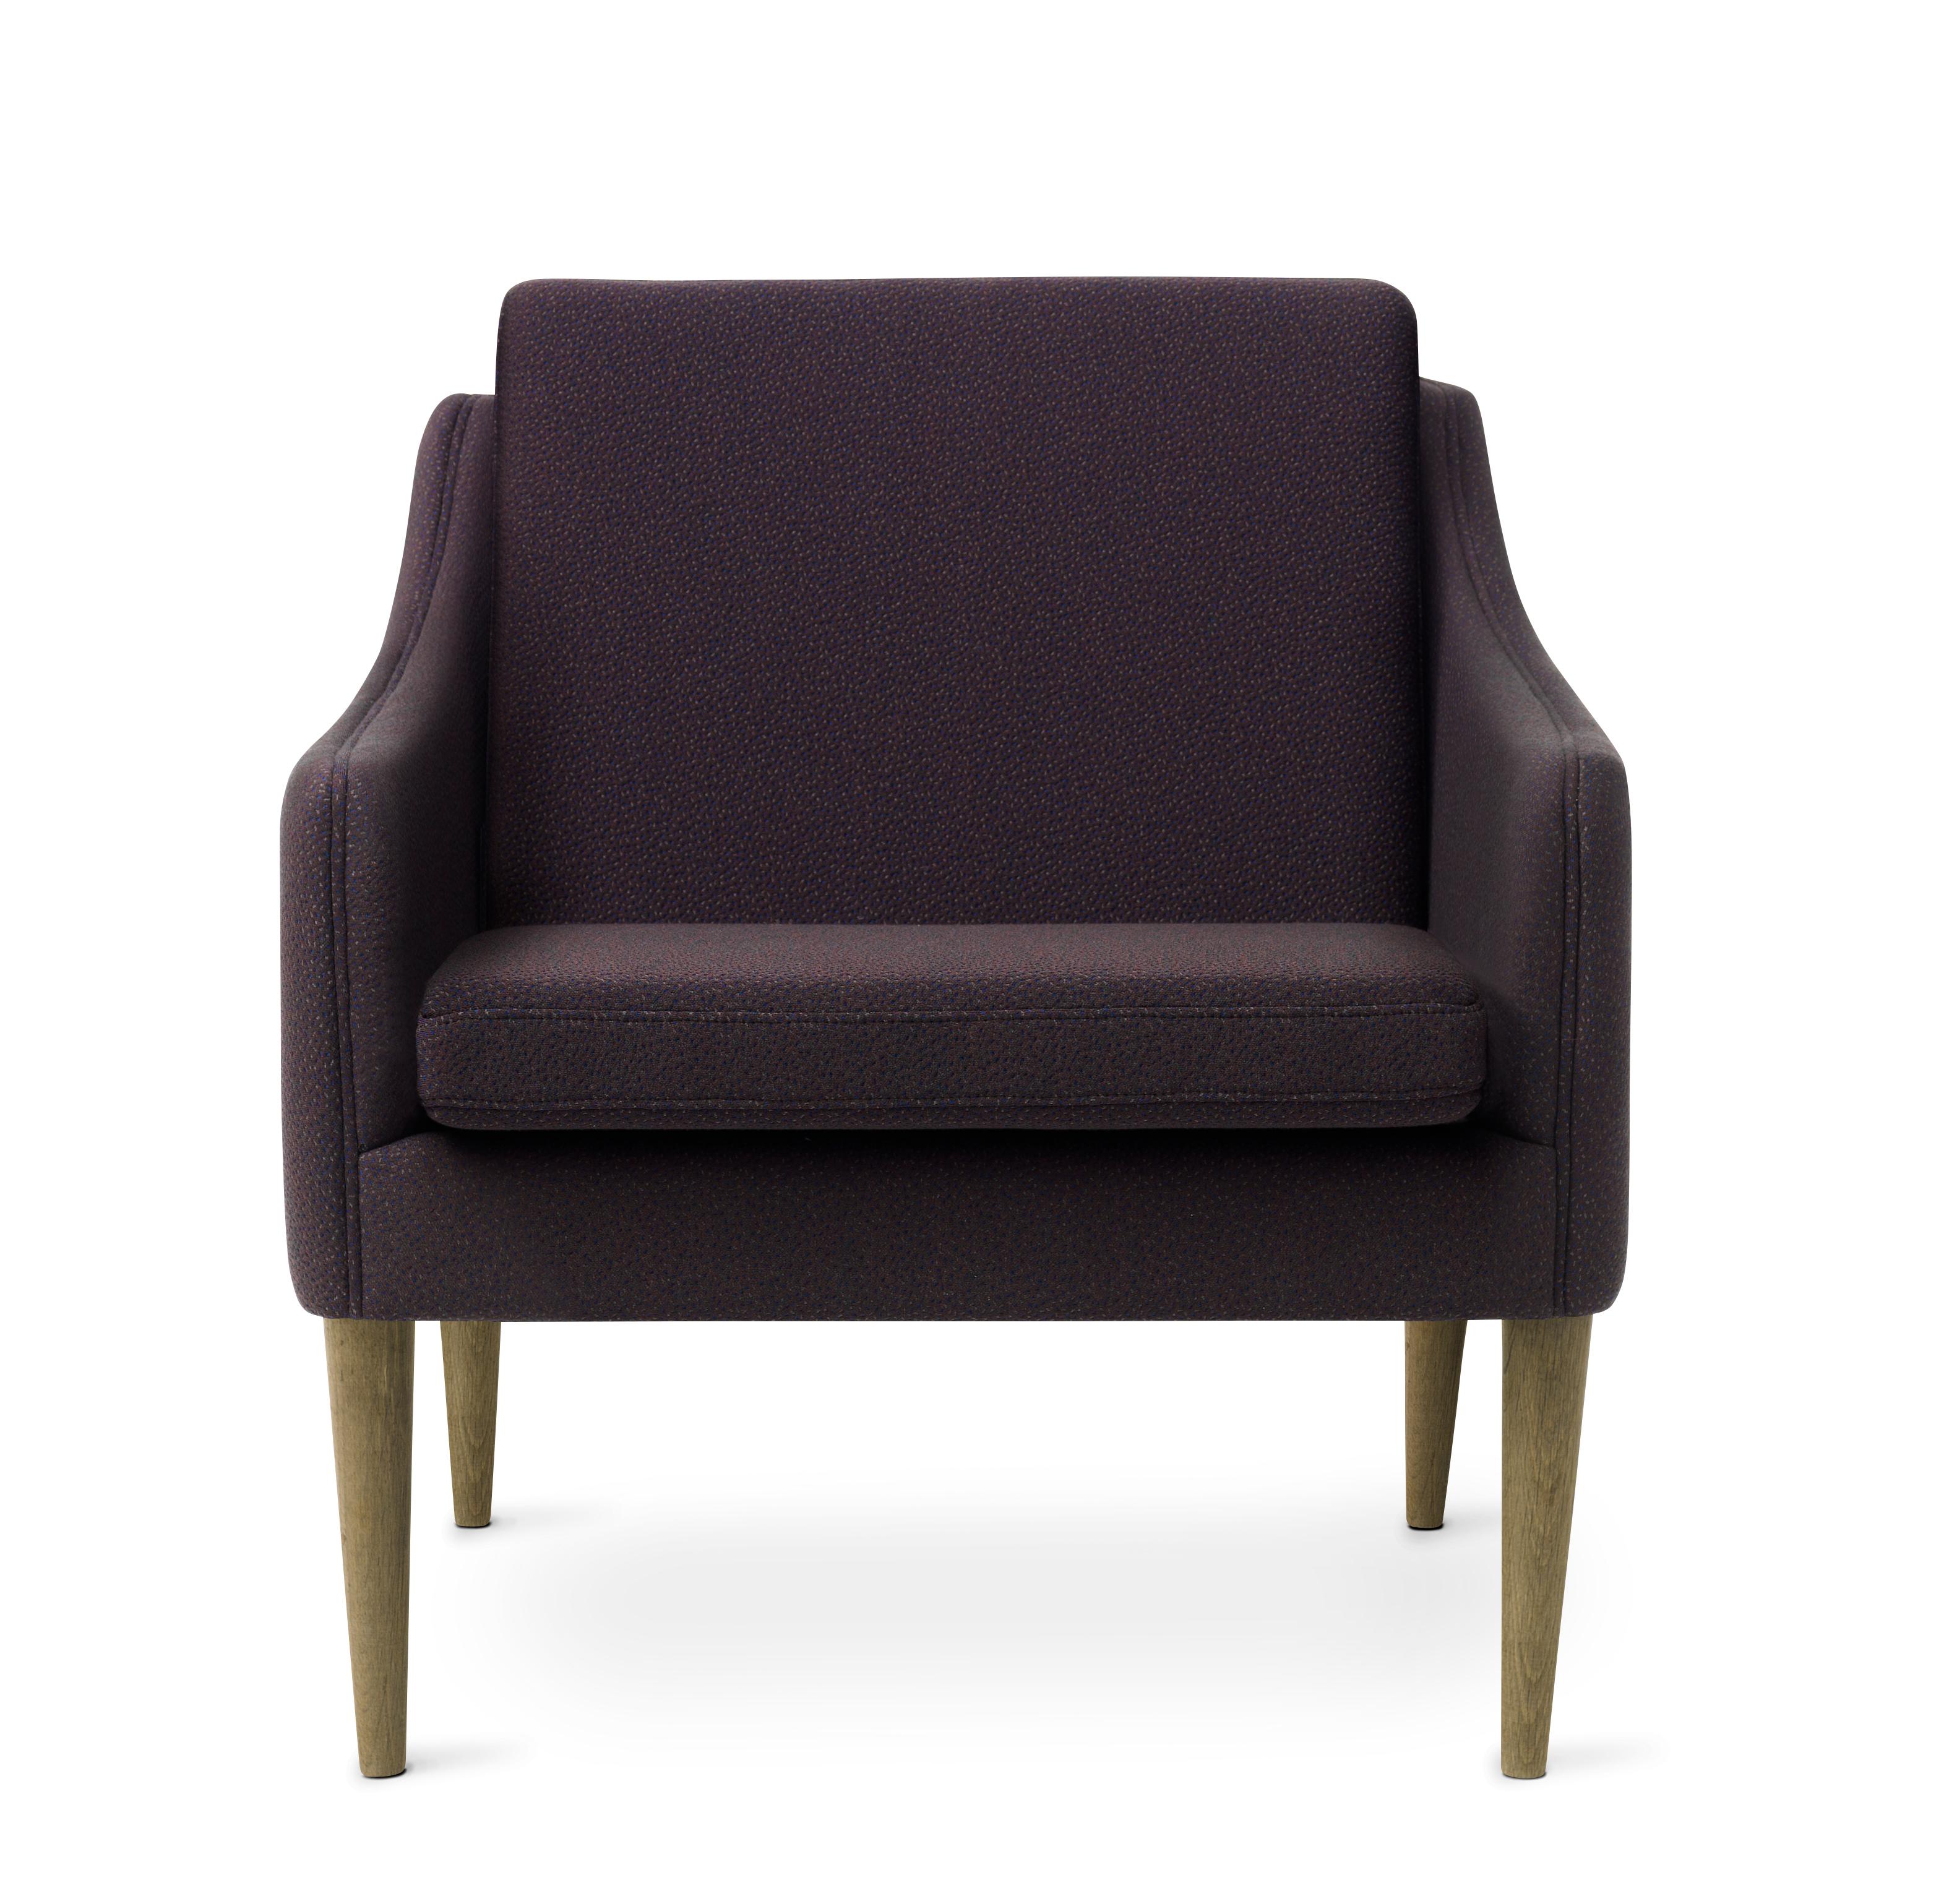 For Sale: Purple (Sprinkles 694) Mr. Olsen Lounge Chair with Smoked Oak Legs, by Hans Olsen from Warm Nordic